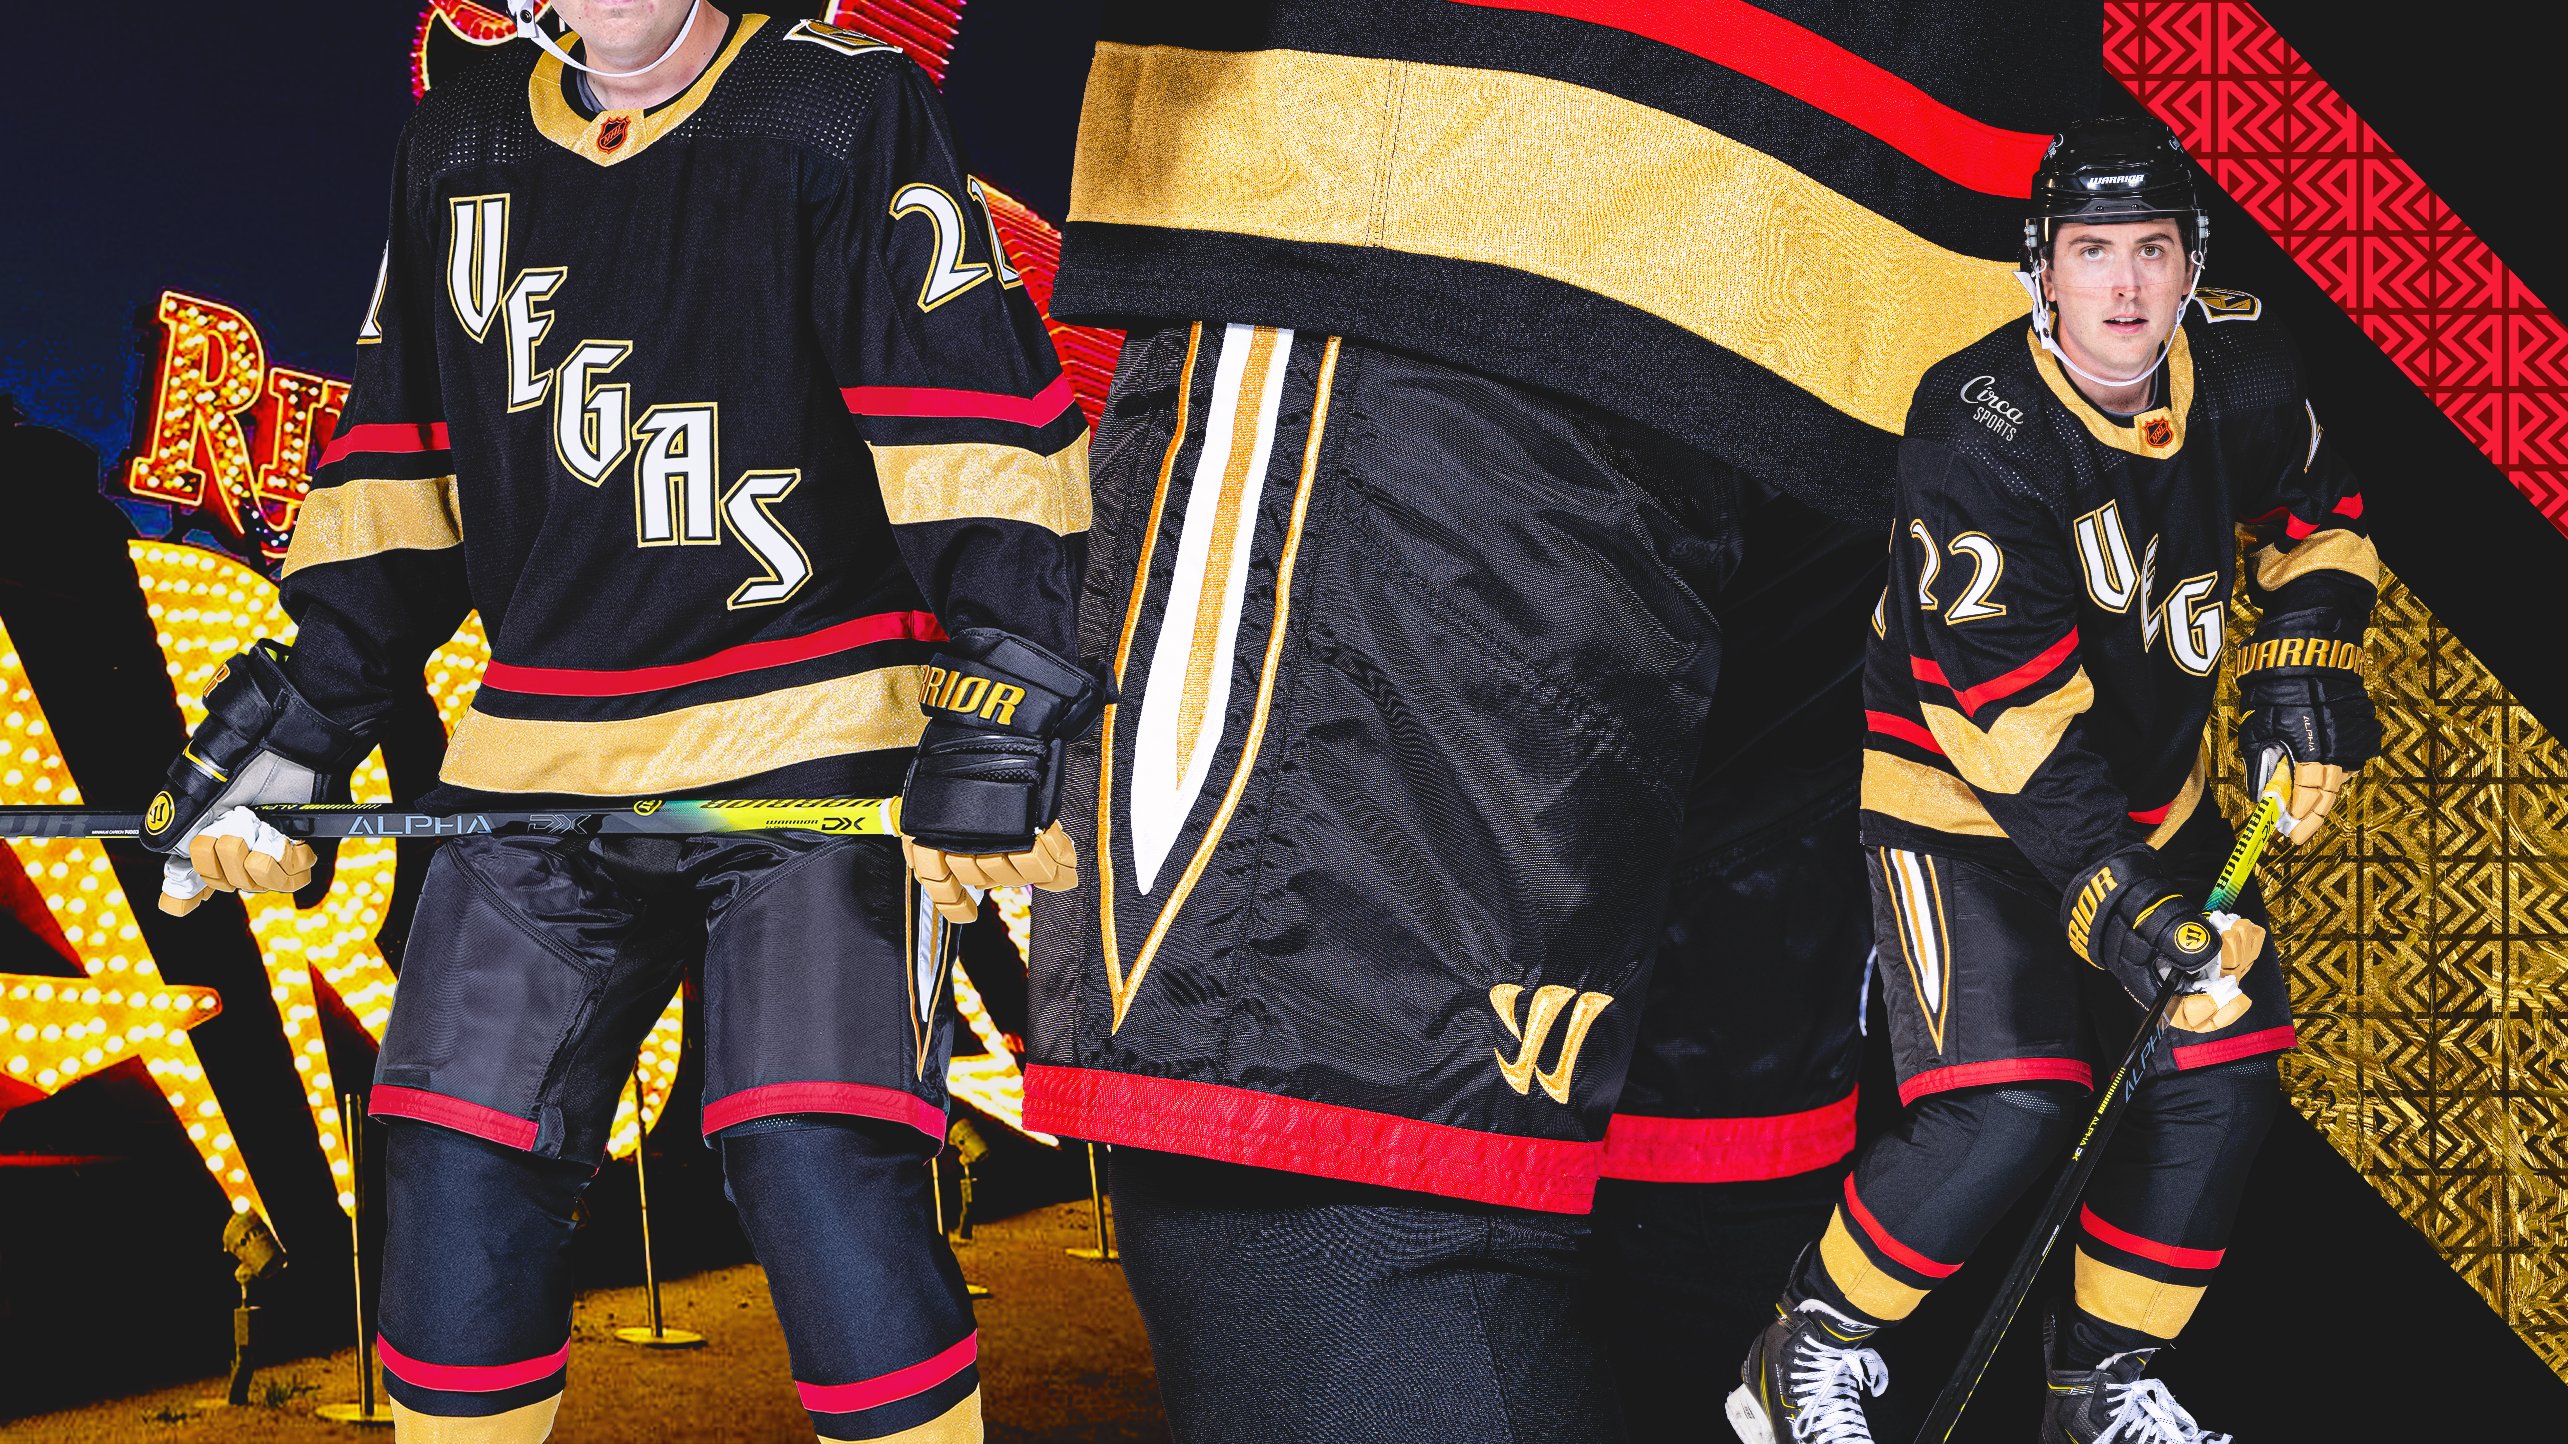 Vegas reveals a new “glow in the dark” retro jersey to be worn